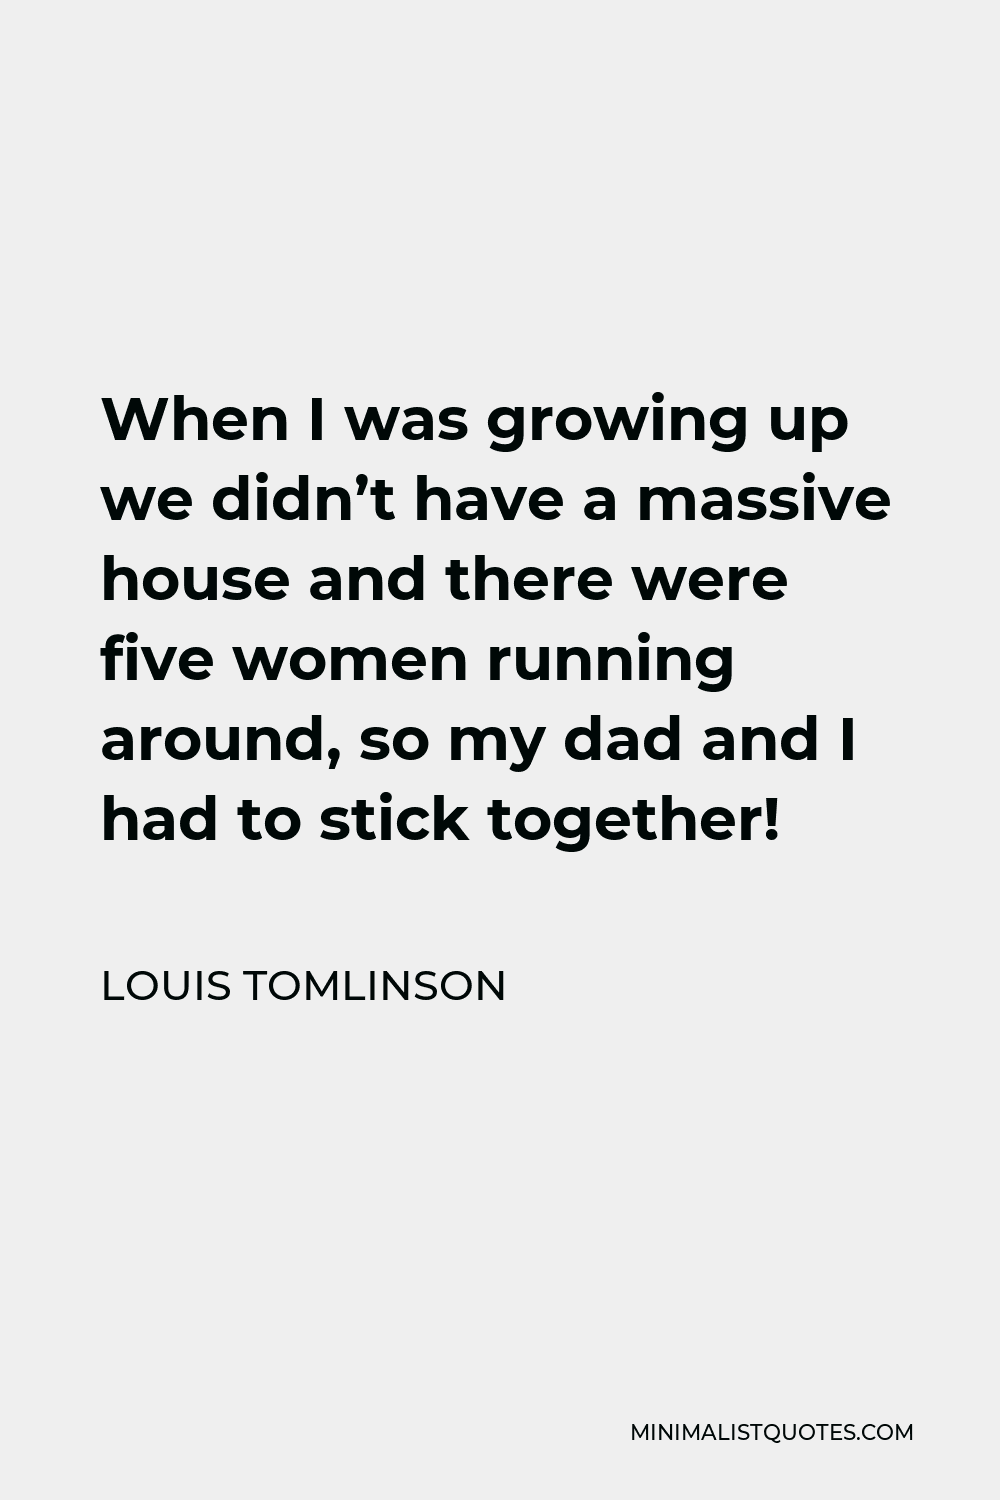 Louis Tomlinson Quote - When I was growing up we didn’t have a massive house and there were five women running around, so my dad and I had to stick together!